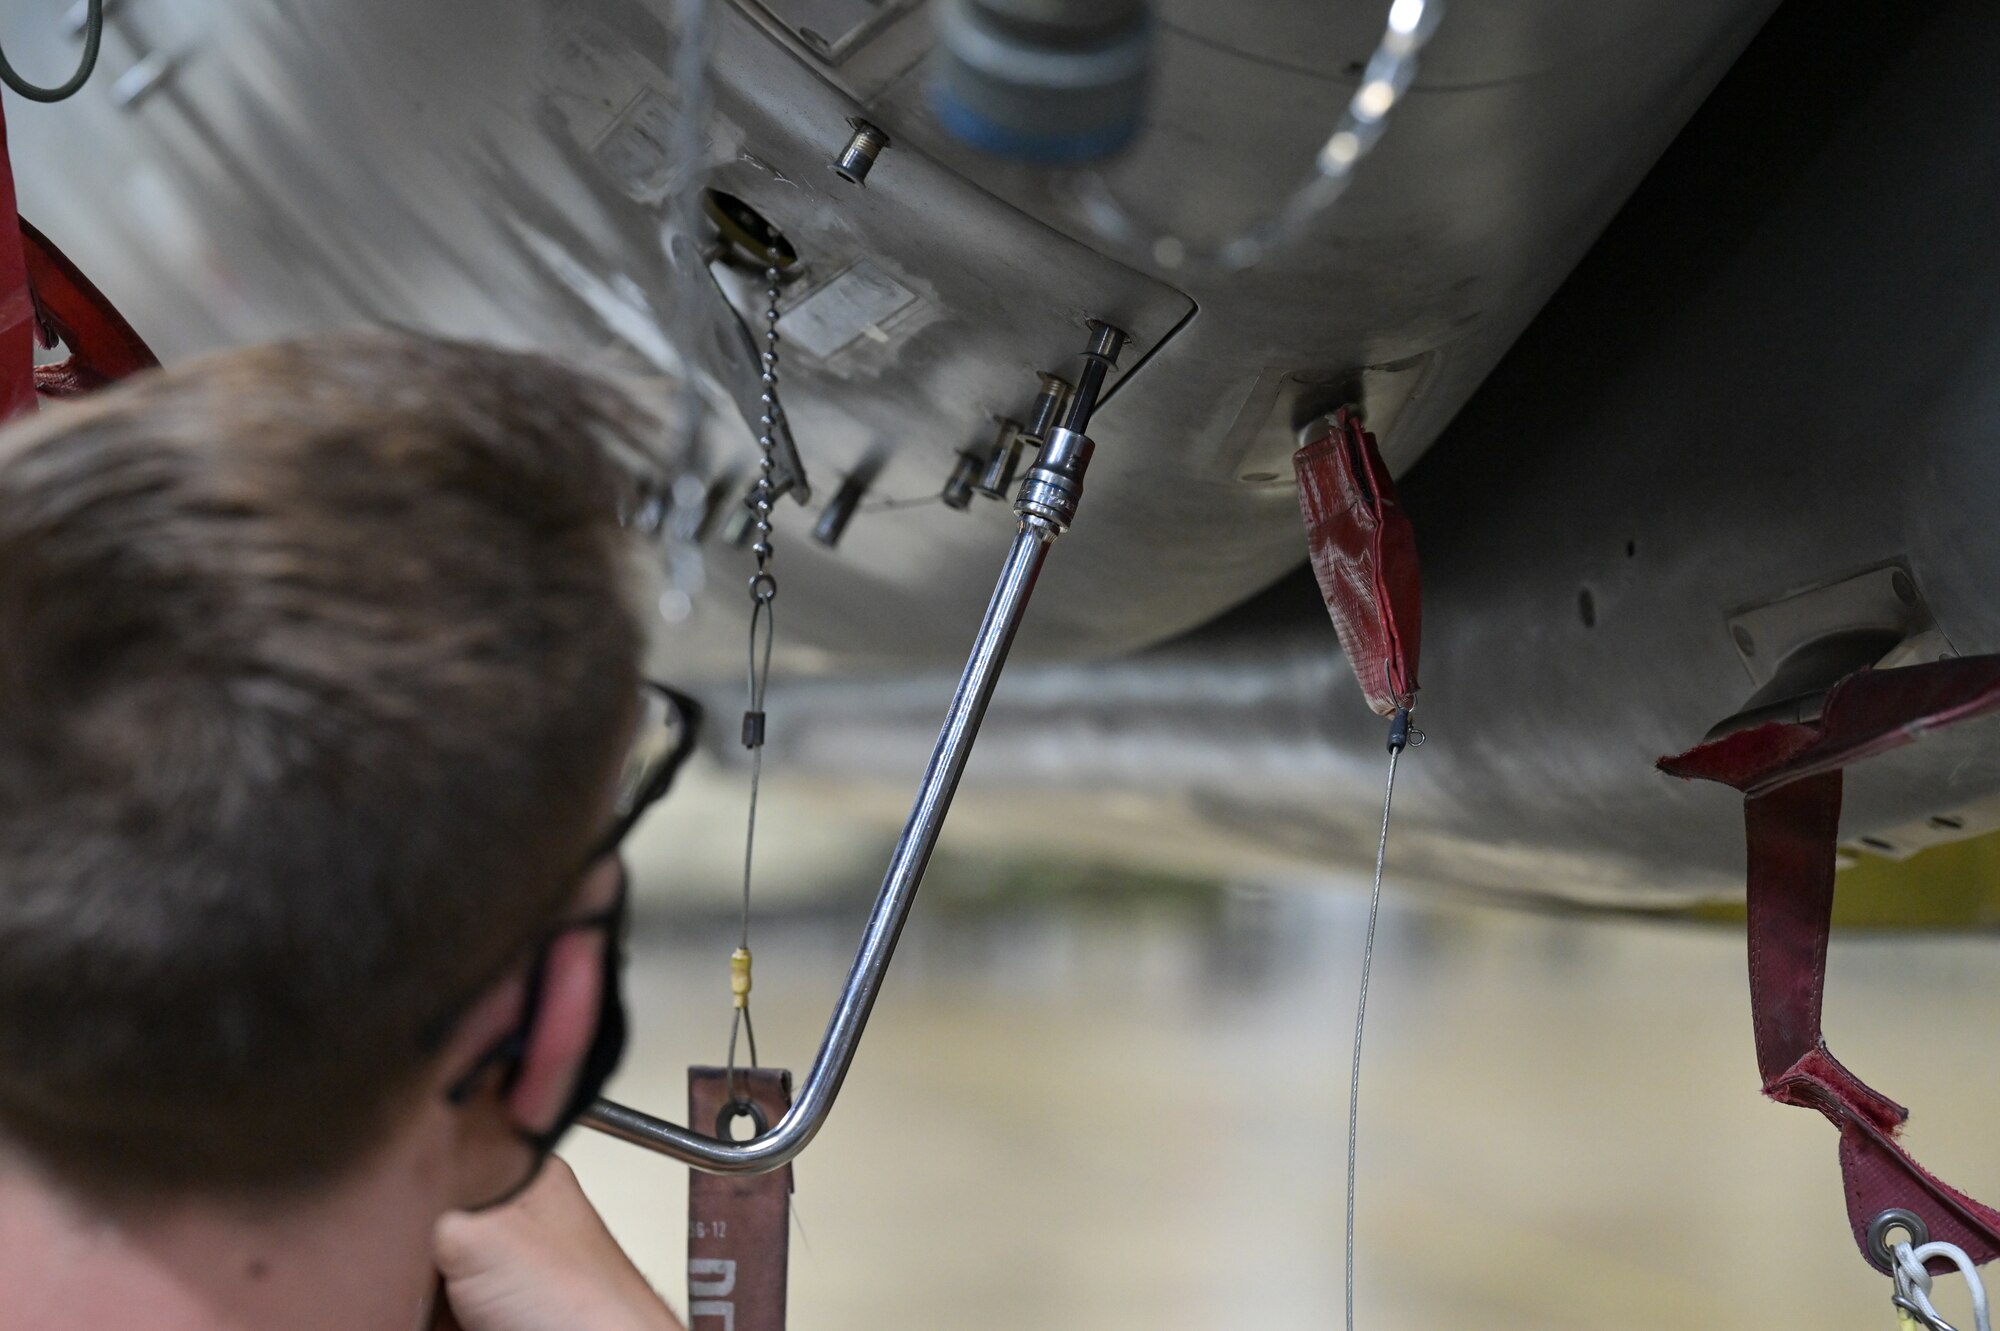 Senior Airman Dakota Johnston, 2nd Munitions Squadron weapons maintenance team member, conducts maintenance on an Air-launched Cruise Missile at Barksdale Air Force Base, Louisiana, Oct. 20, 2021. The ALCM was developed to increase the effectiveness and survivability of the B-52H Stratofortress strategic bomber. (U.S. Air Force photo by Airman 1st Class Jonathan E. Ramos)